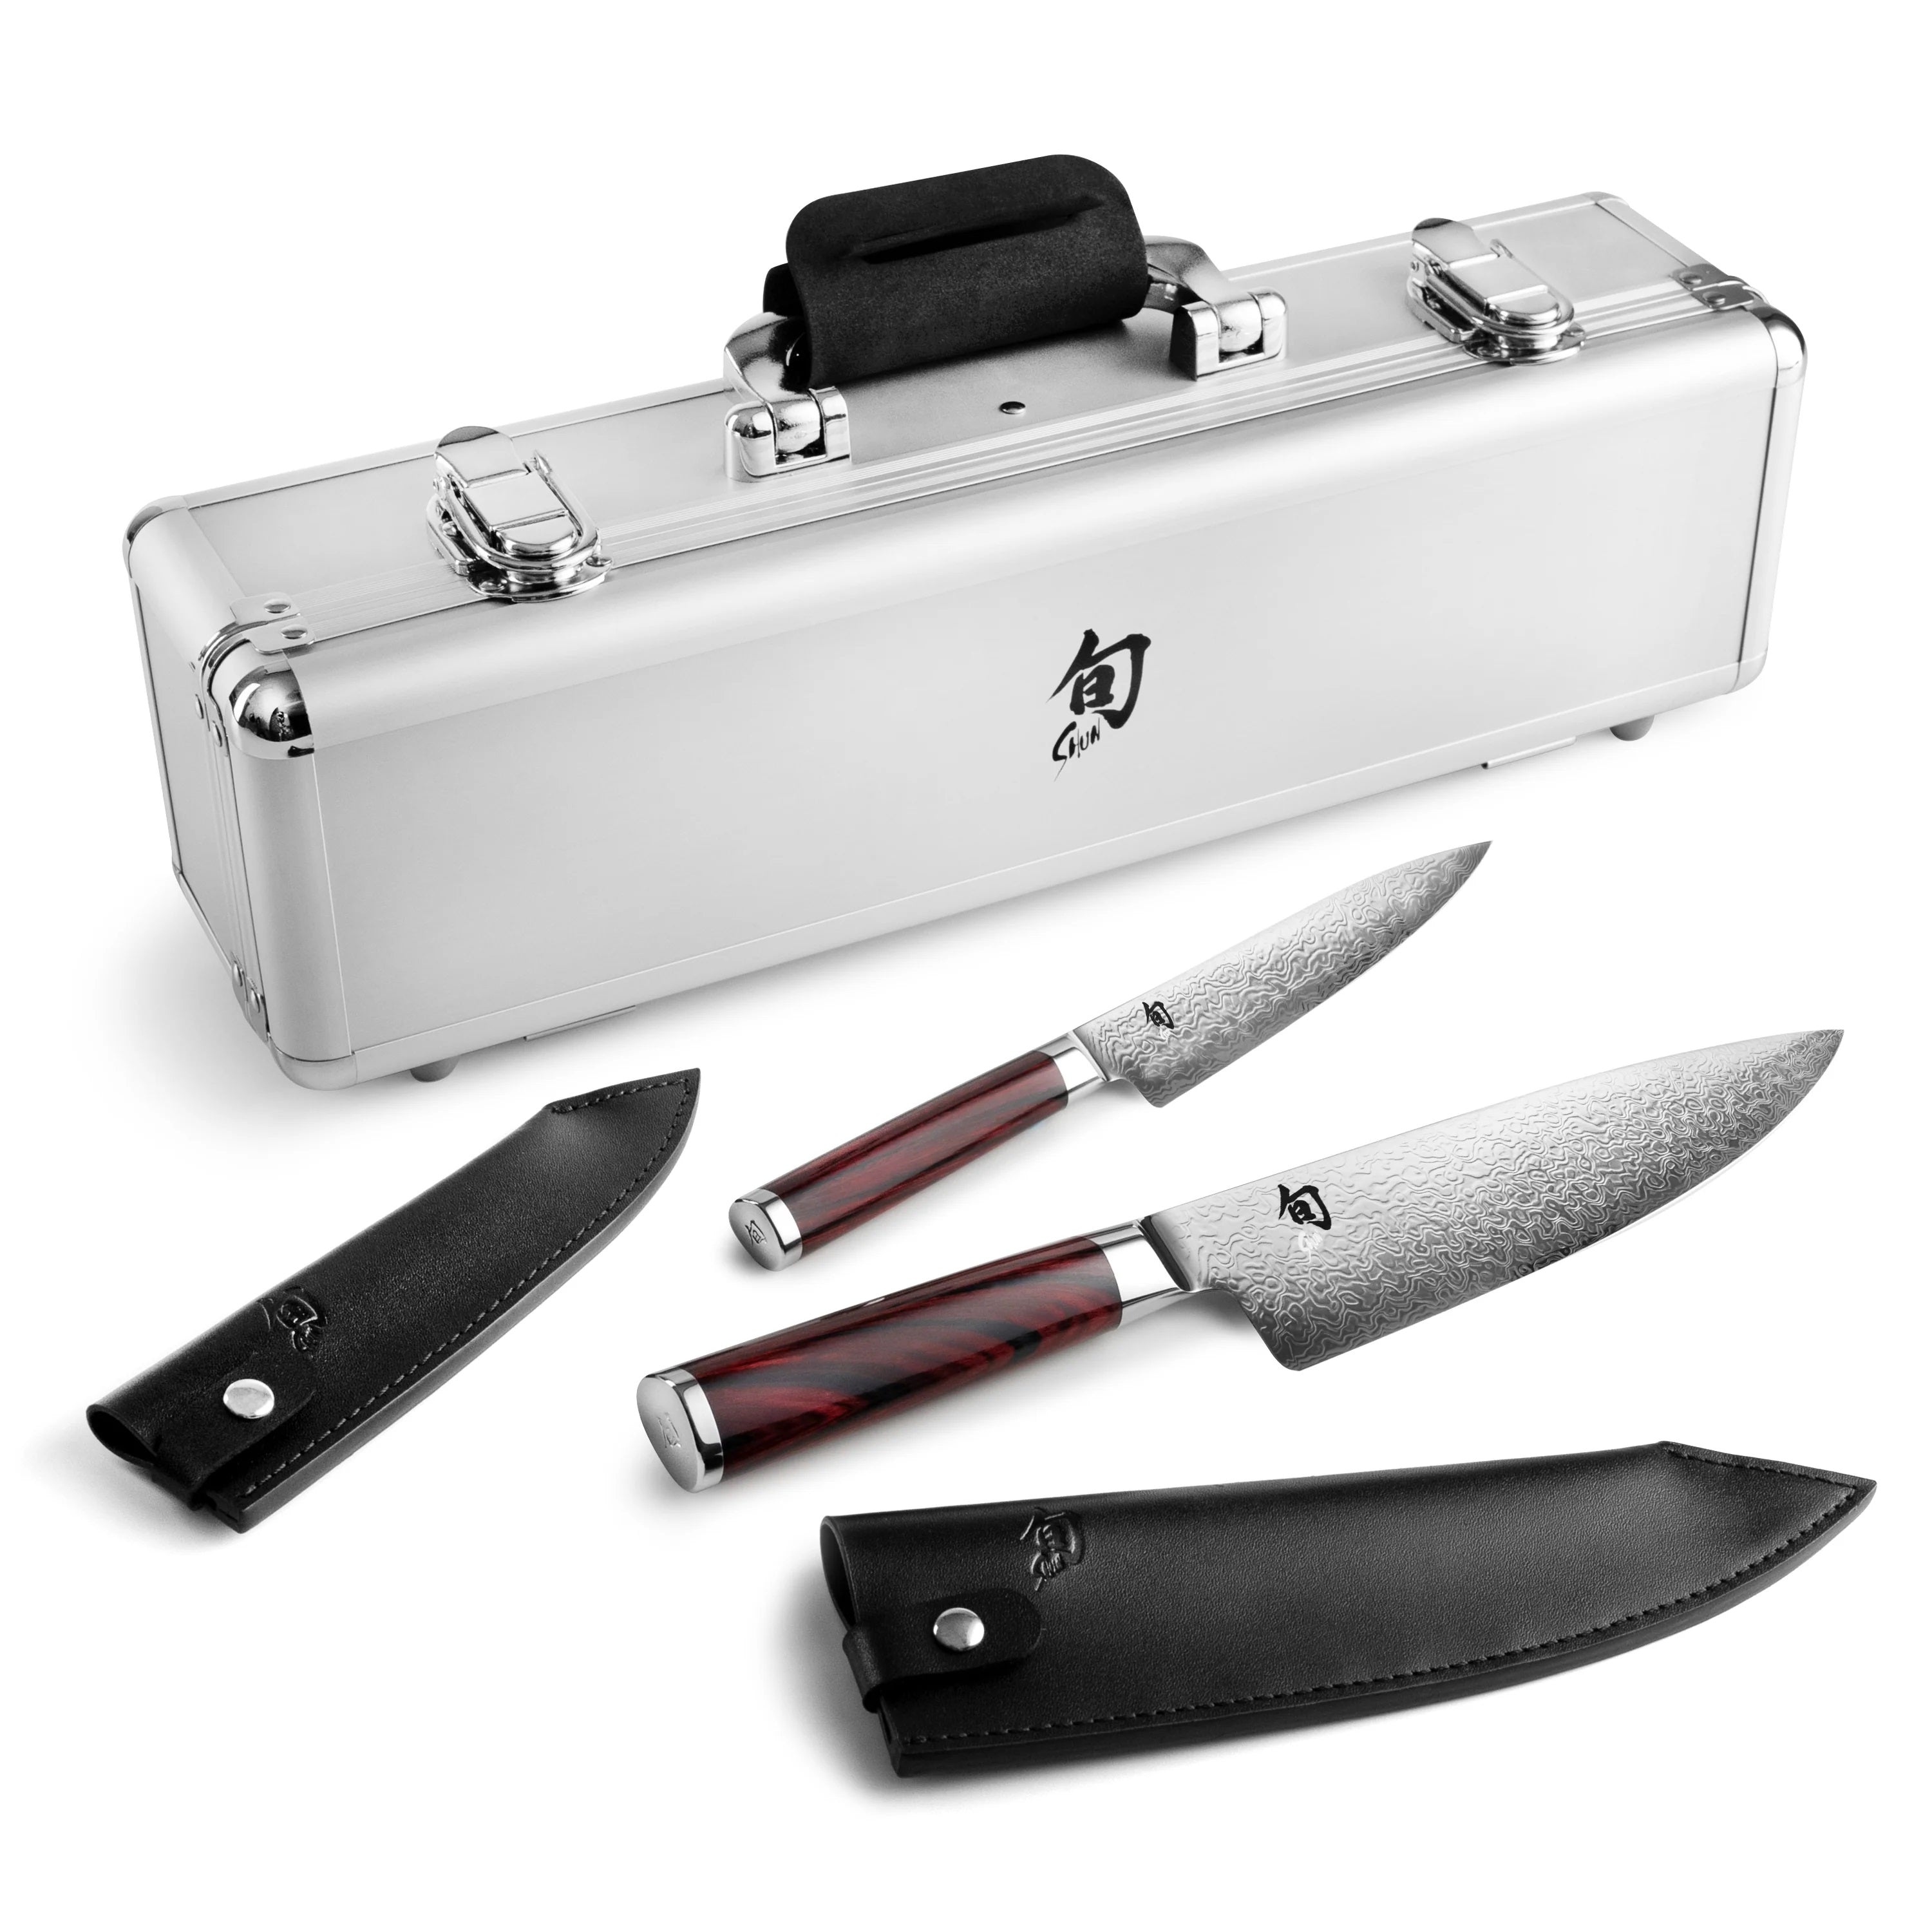 HD HUNTER.DUAL Knife Sets for Kitchen with Block, HUNTER